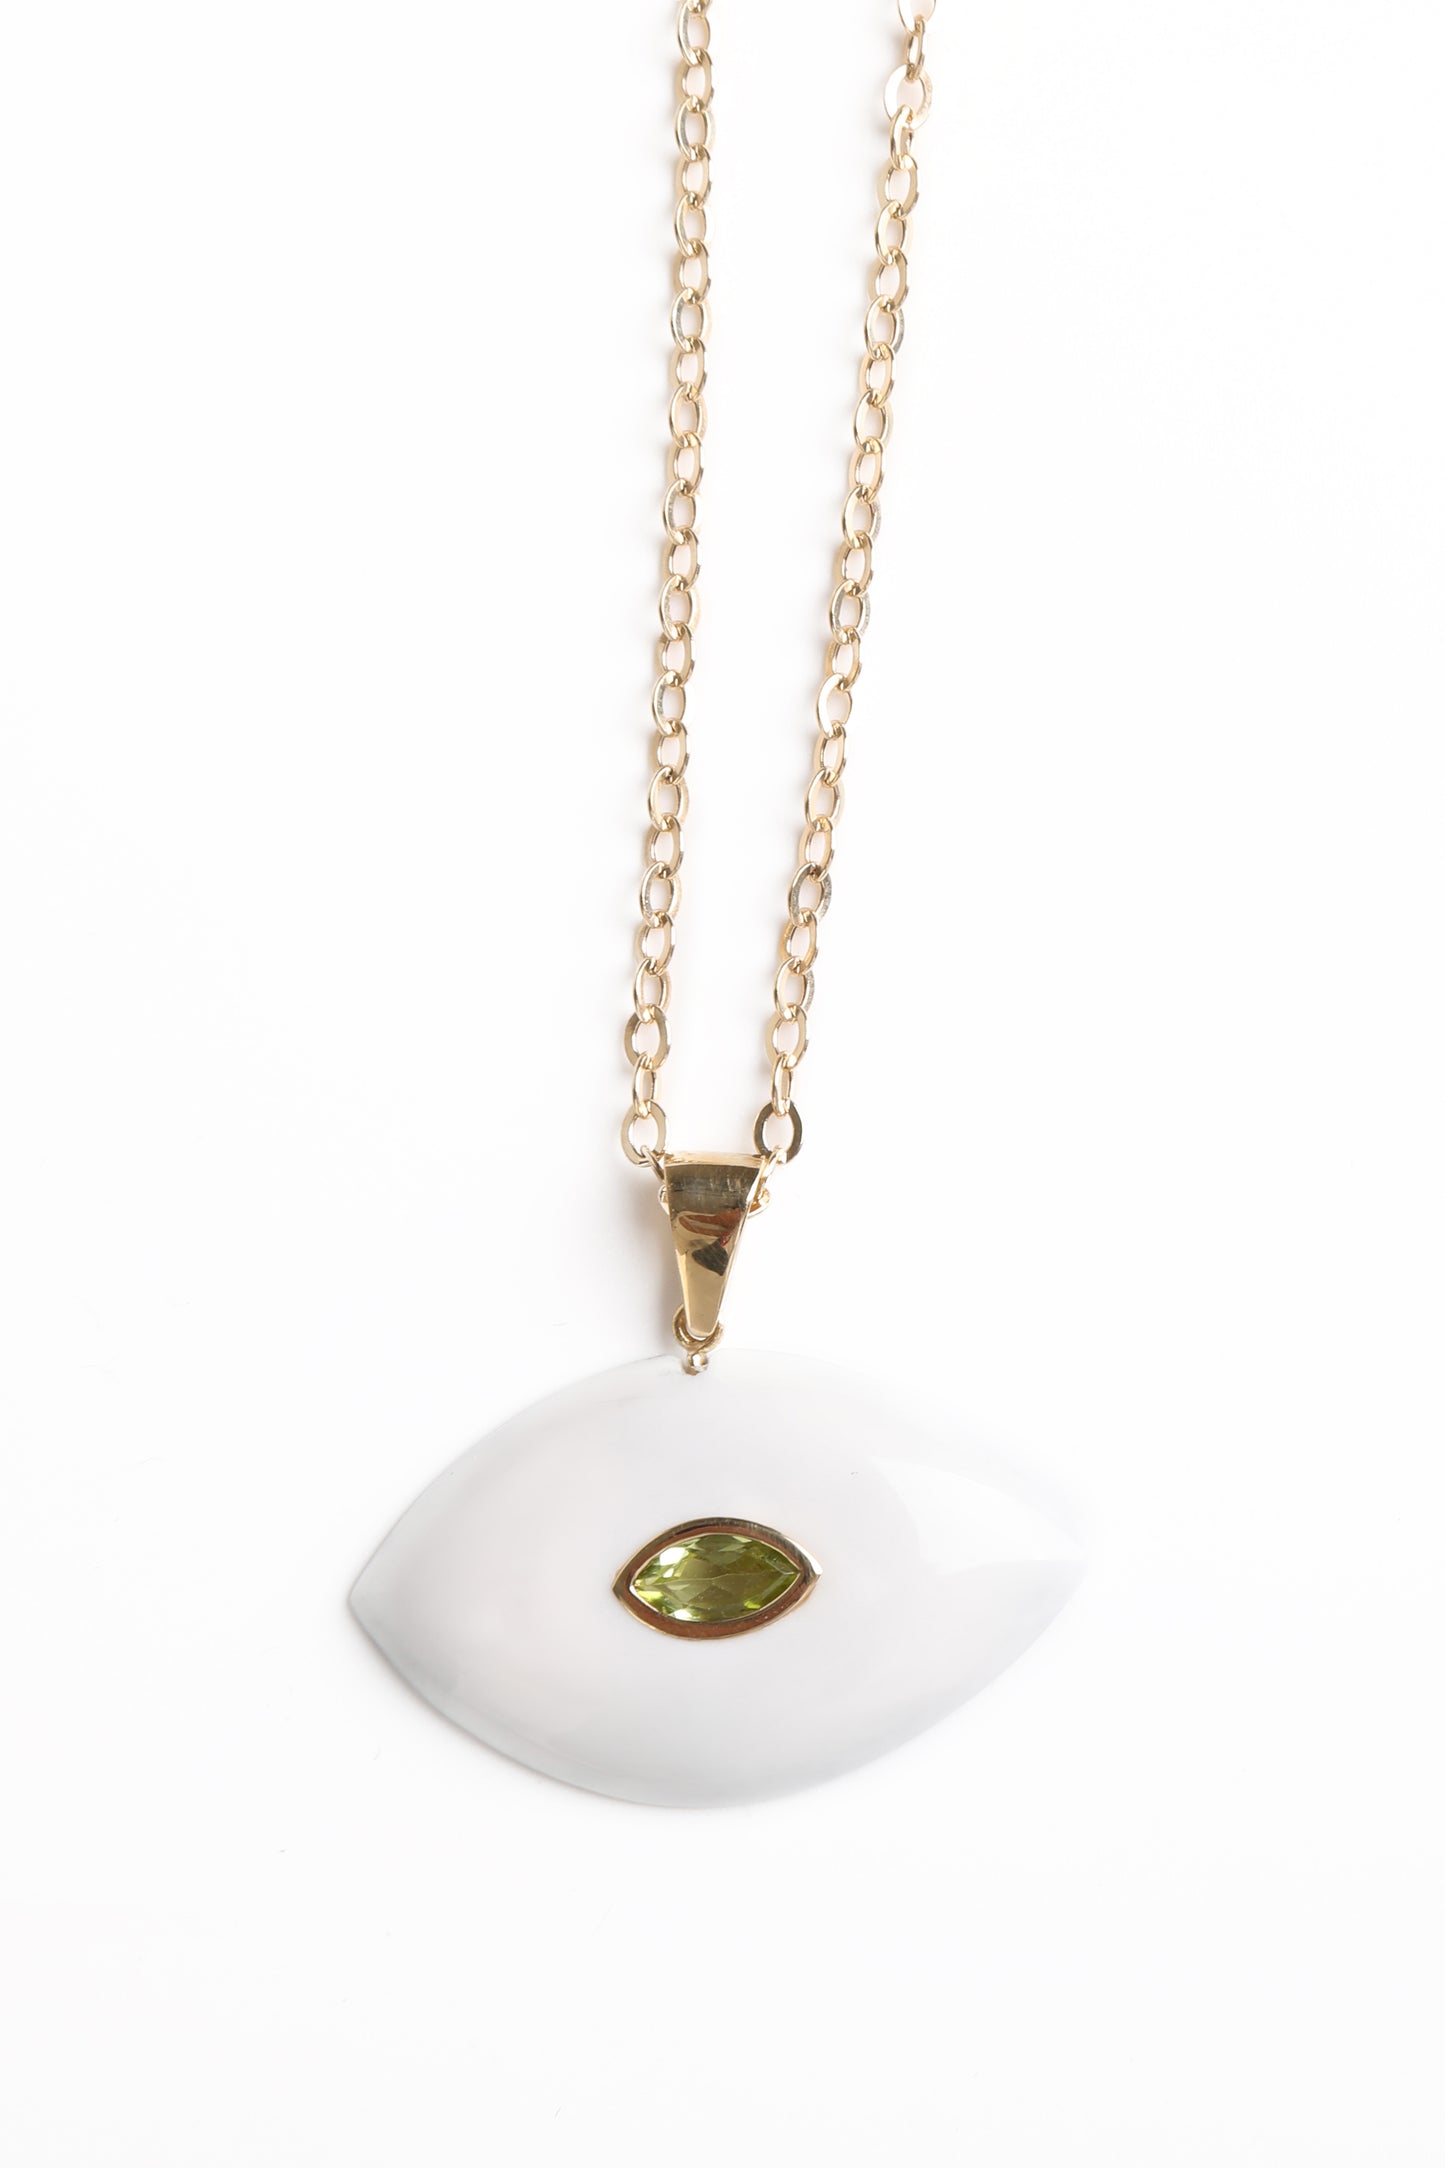 Resin and Peridot eye necklace